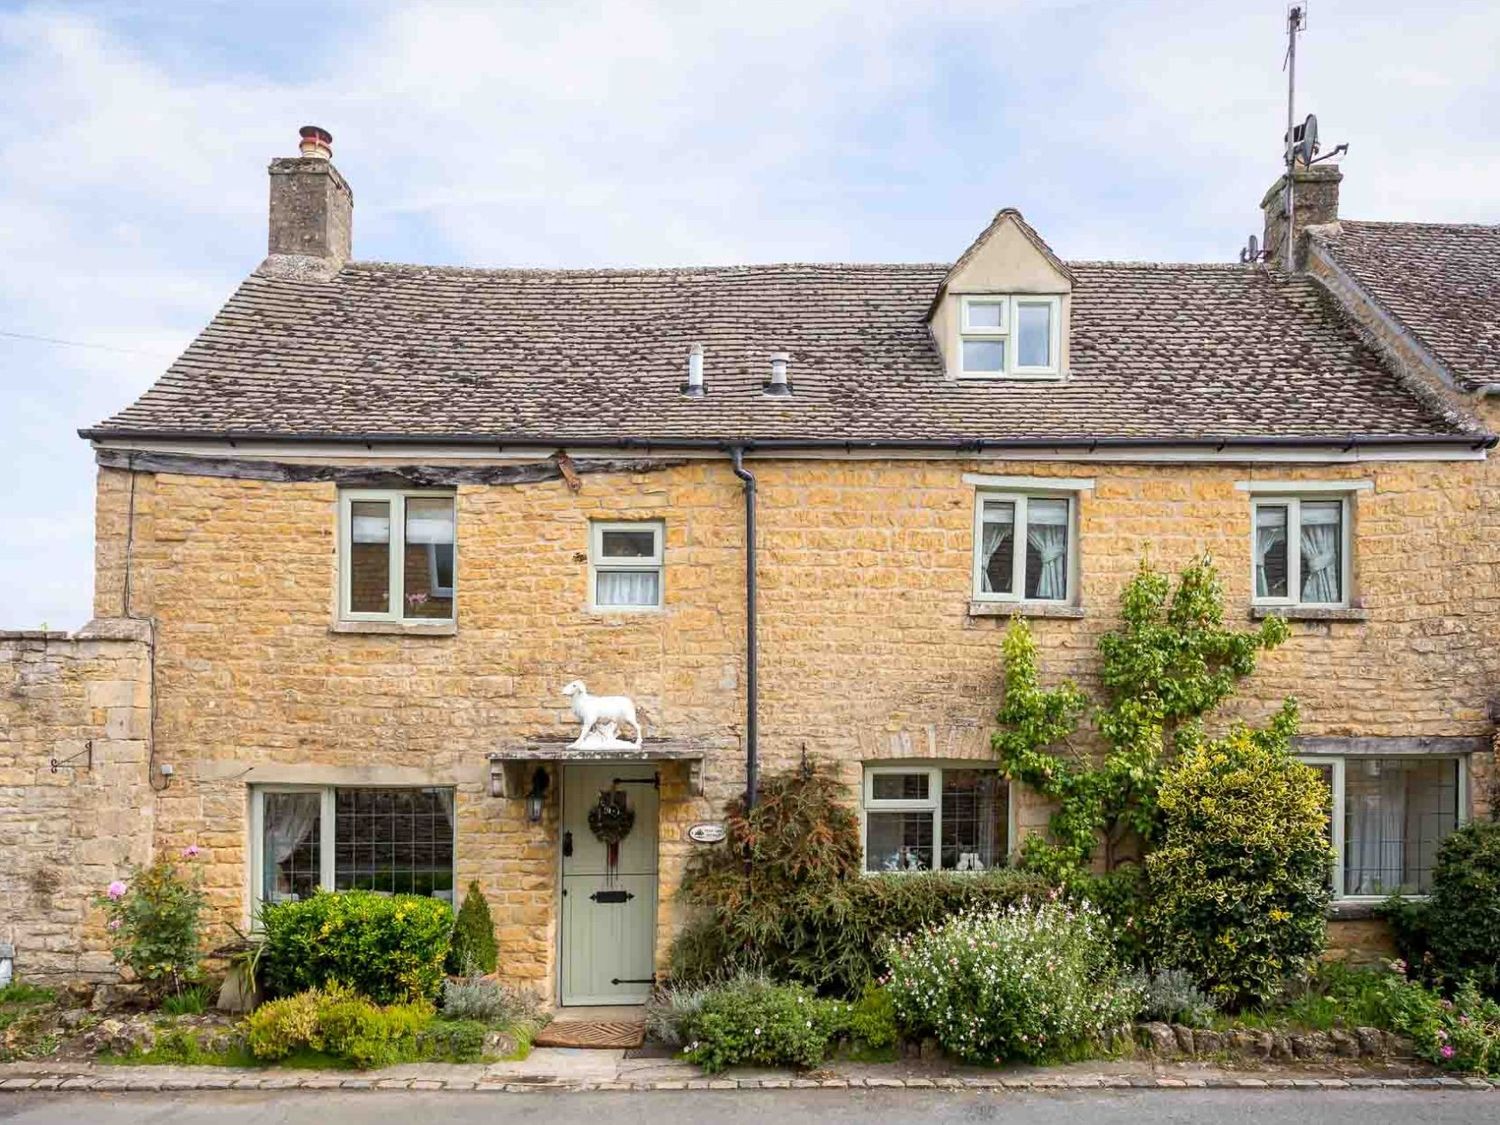 Pear Tree Cottage - Cotswolds - 1091218 - photo 1